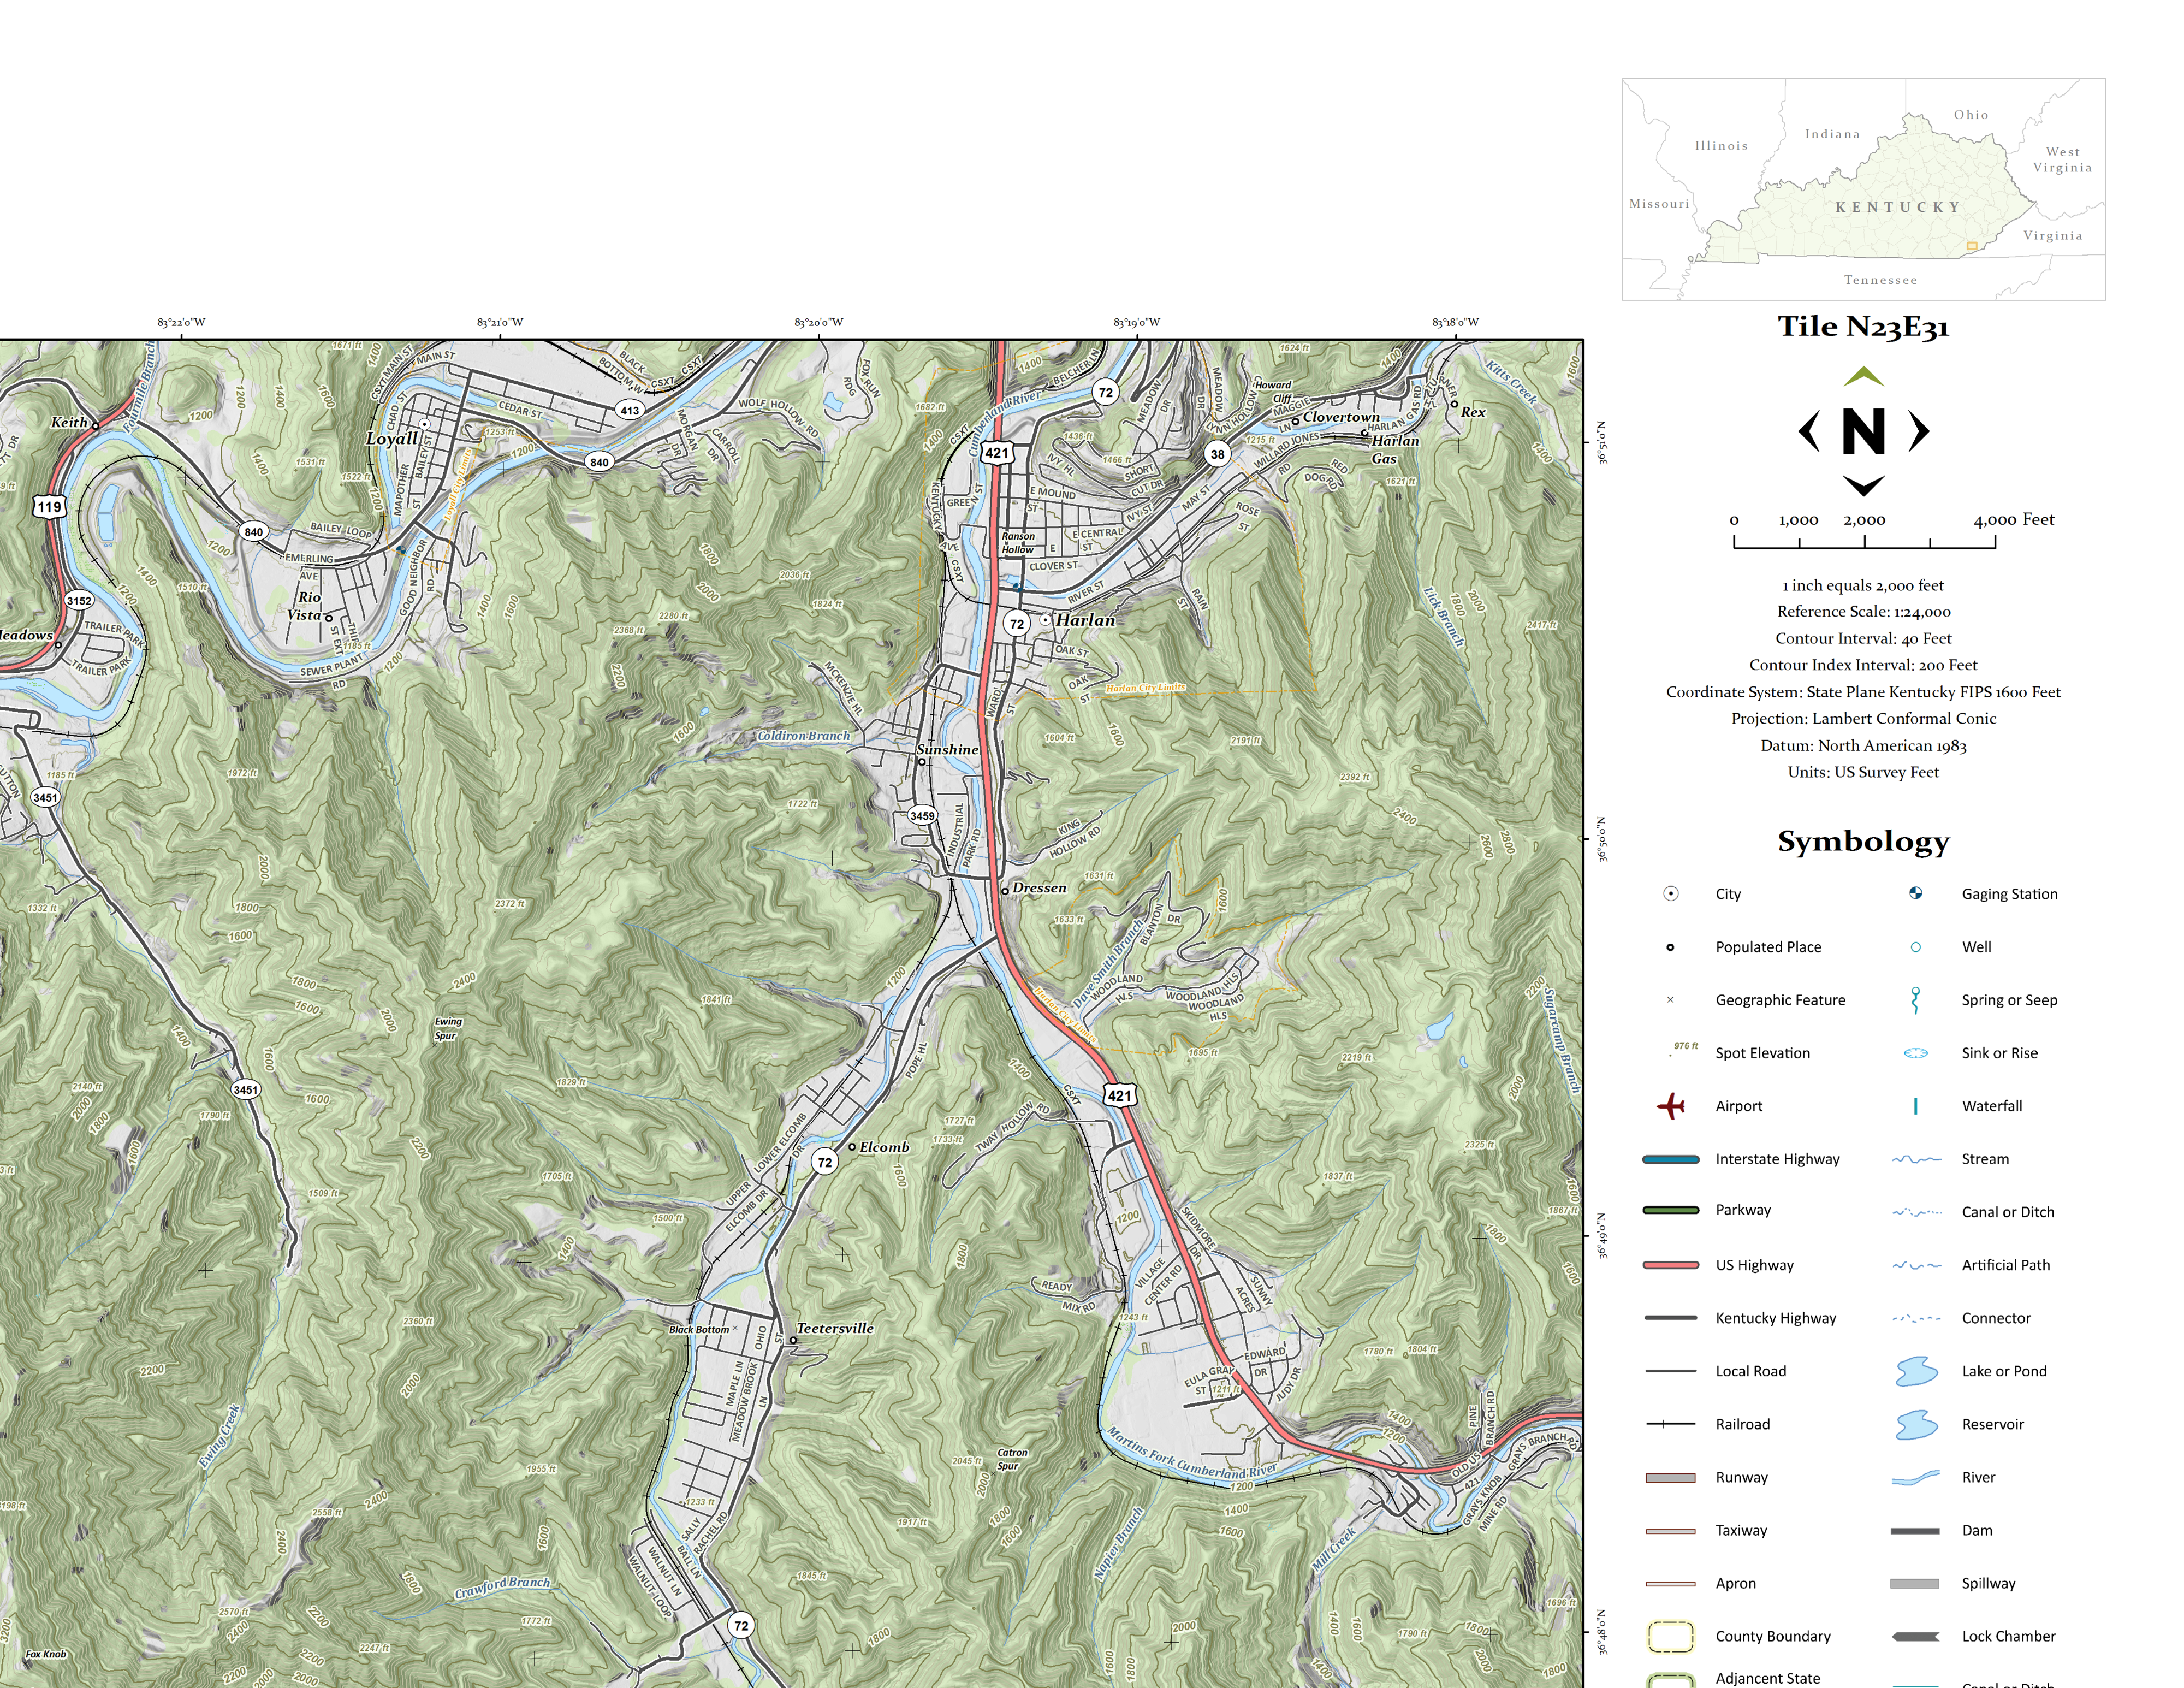 Kytopo Kentucky S New Topographic Map Series The View From